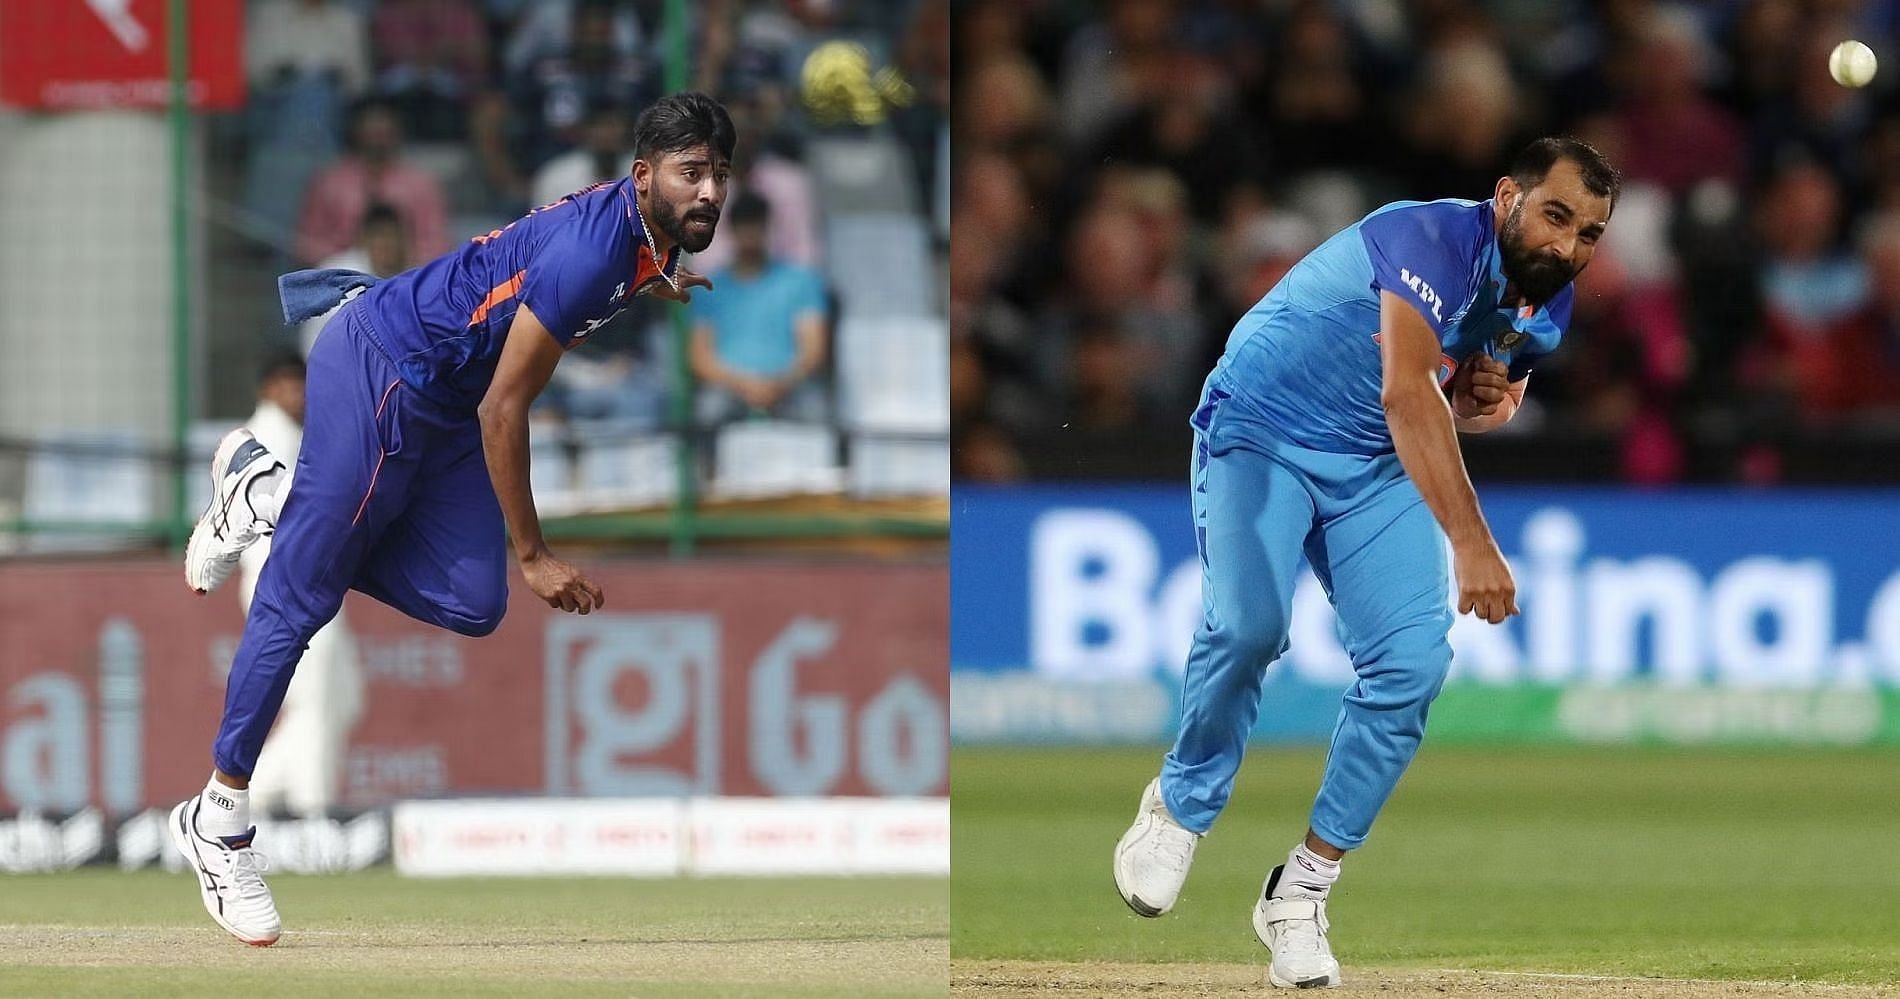 Mohammed Siraj (left) and Mohammed Shami are the frontilne pacers picked alongside Jasprit Bumrah.